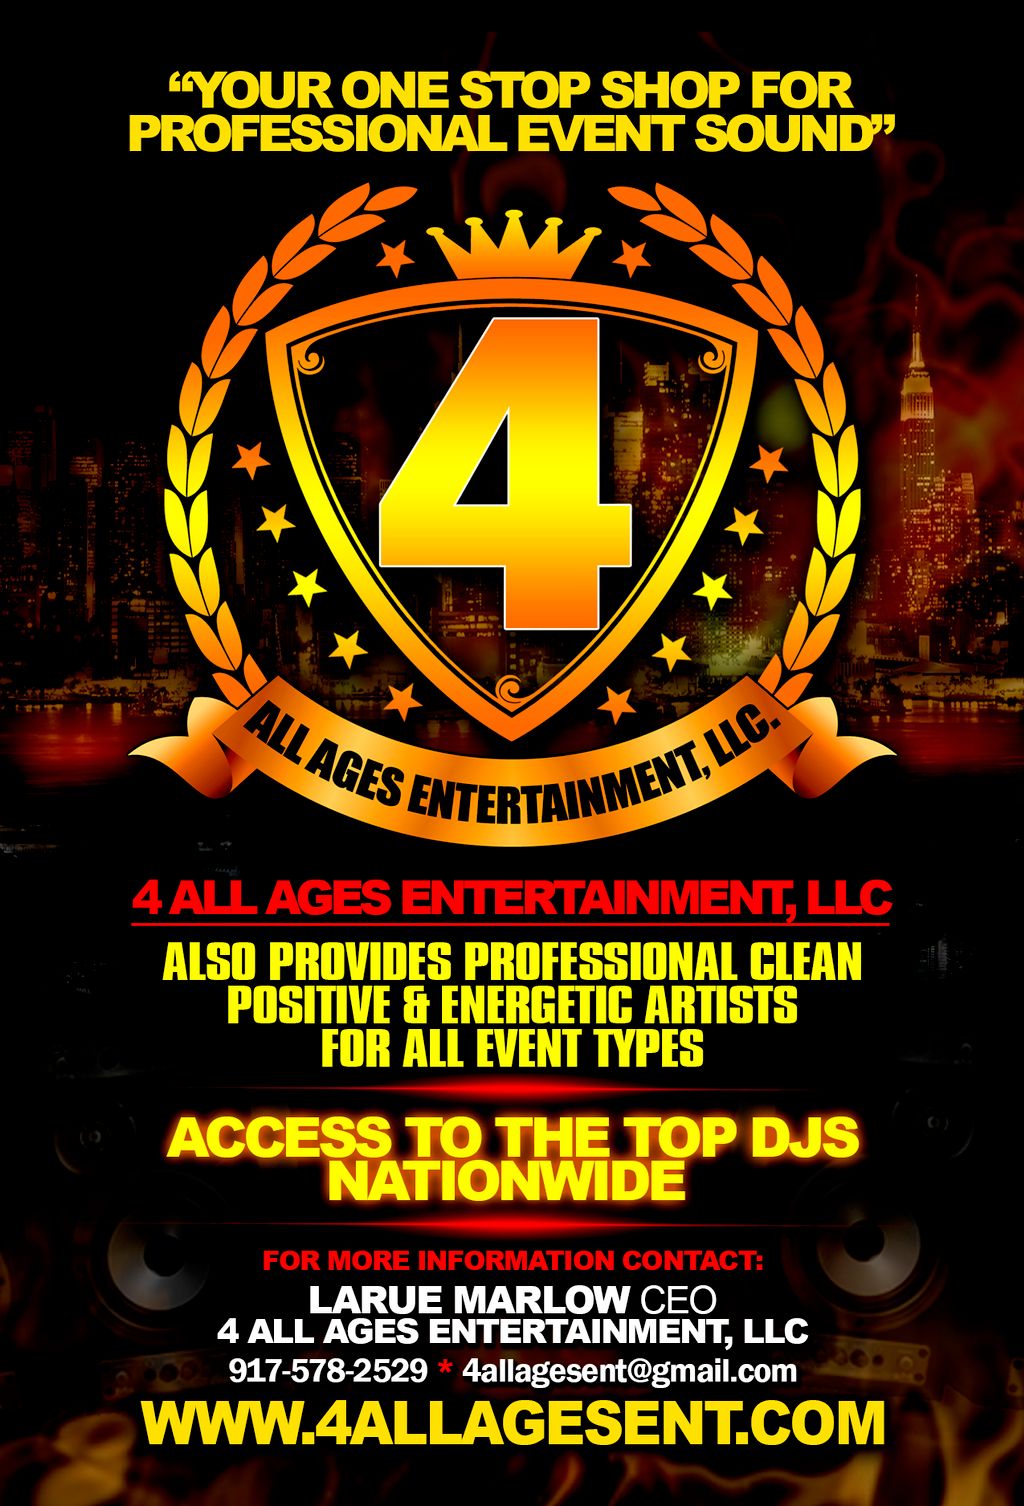 4 All Ages Entertainment, LLC